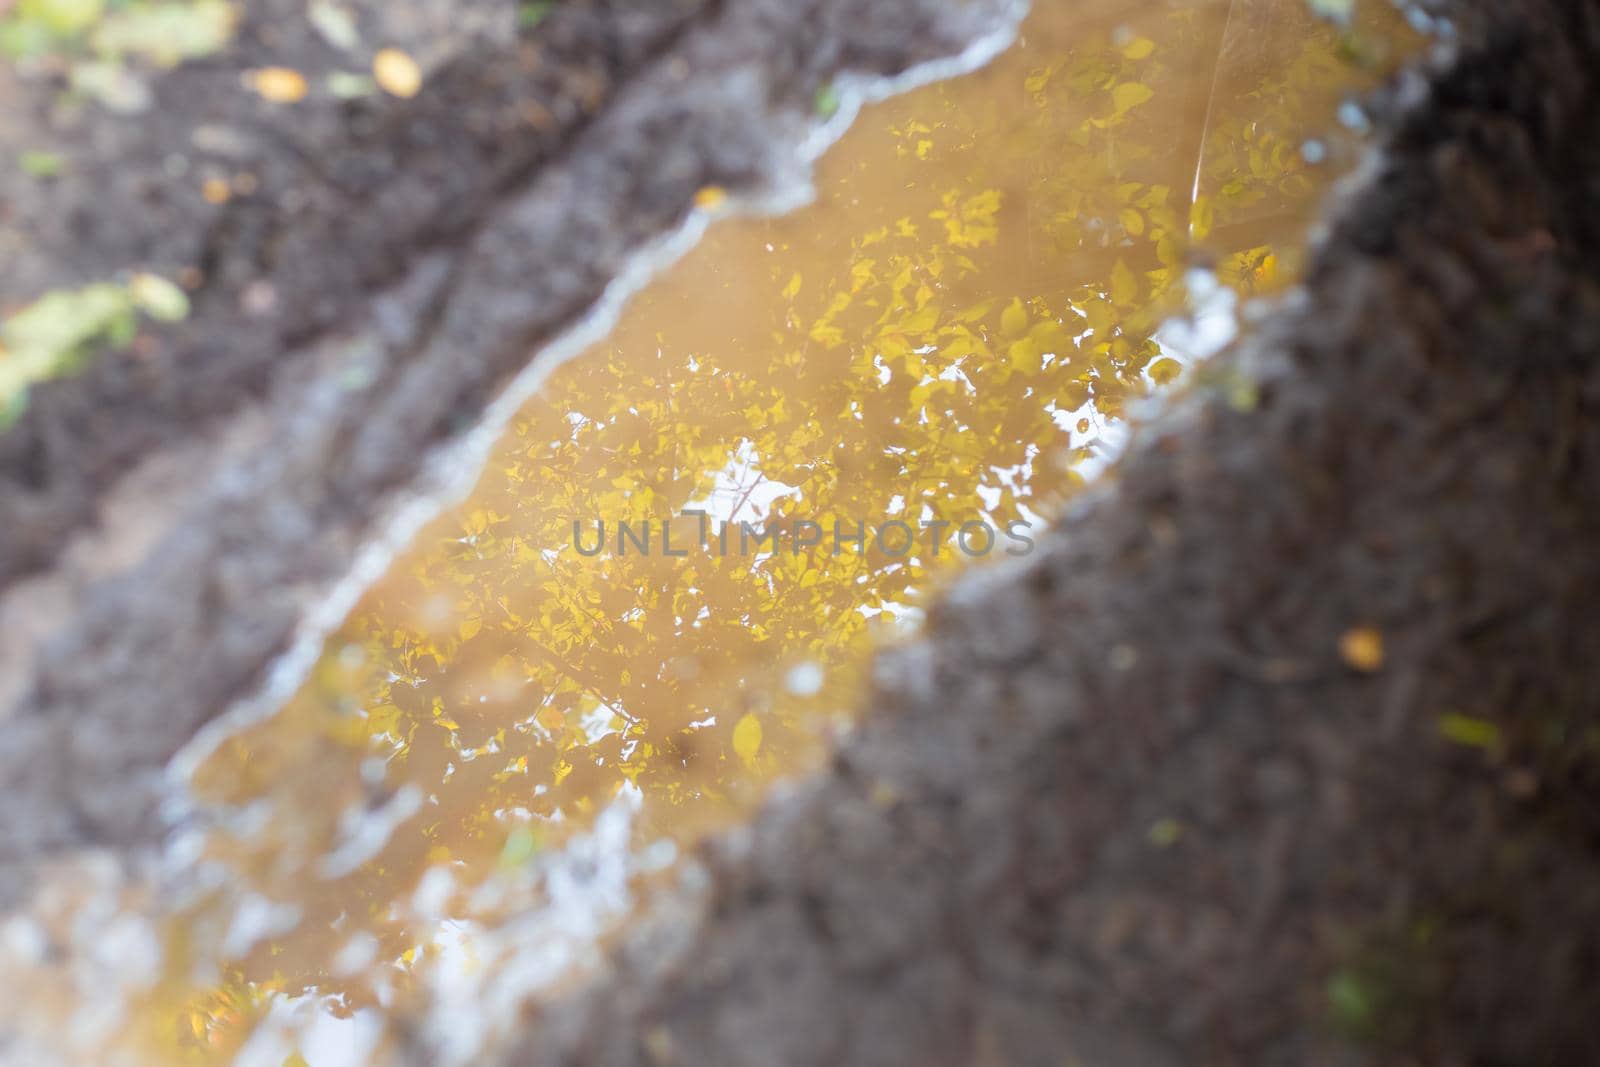 Mud and puddle in autumn. Reflection of a tree with yellowed leaves in the water. Blurred focus.